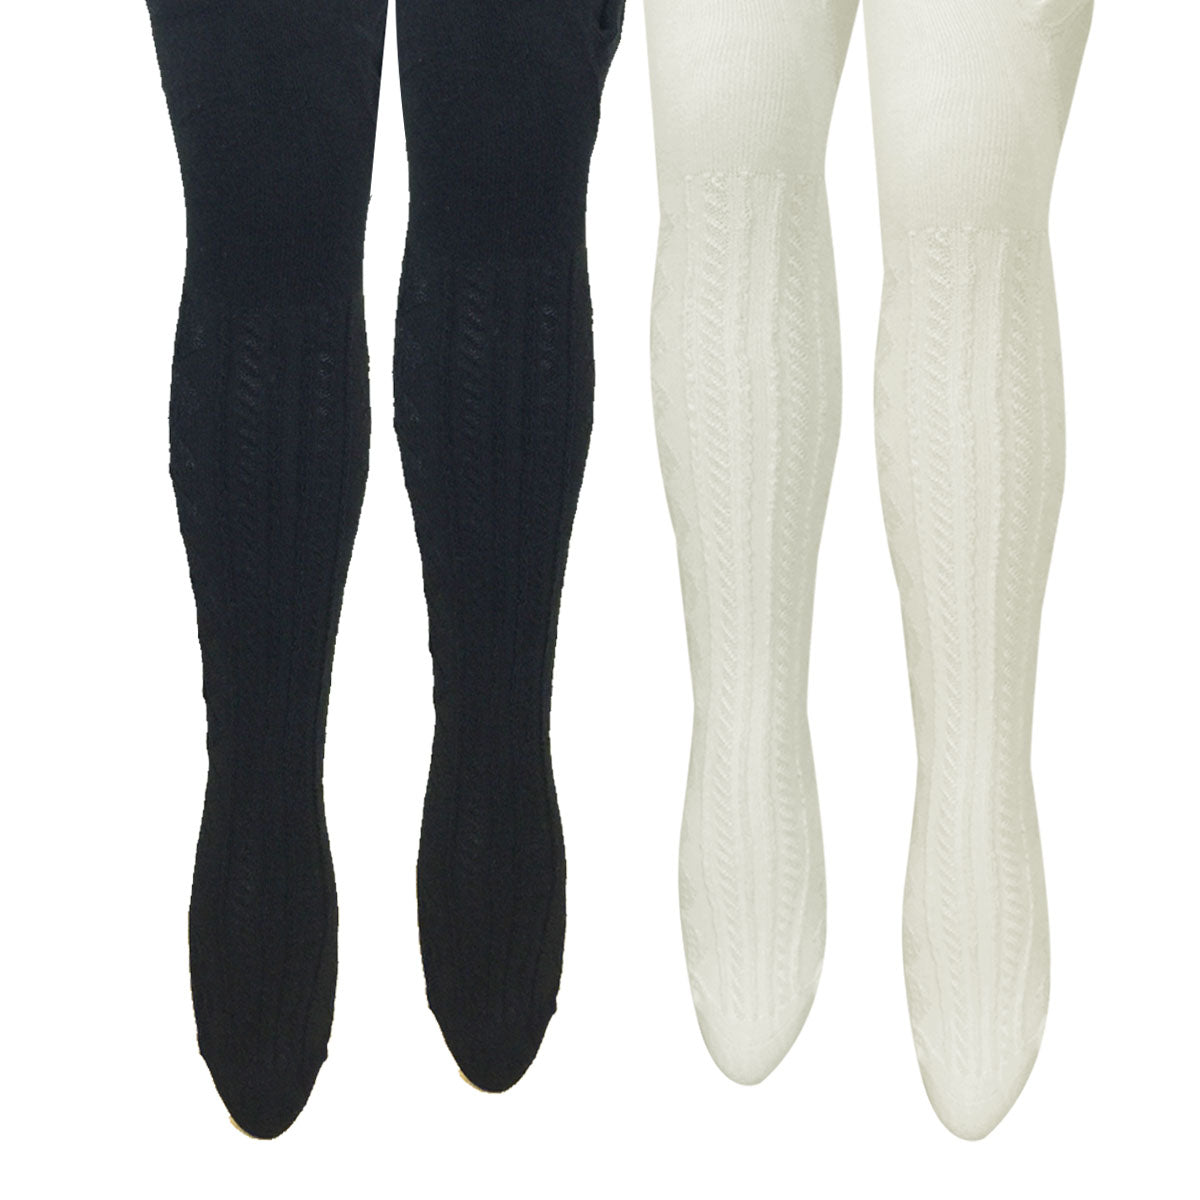 Cable Knit Tights in Black